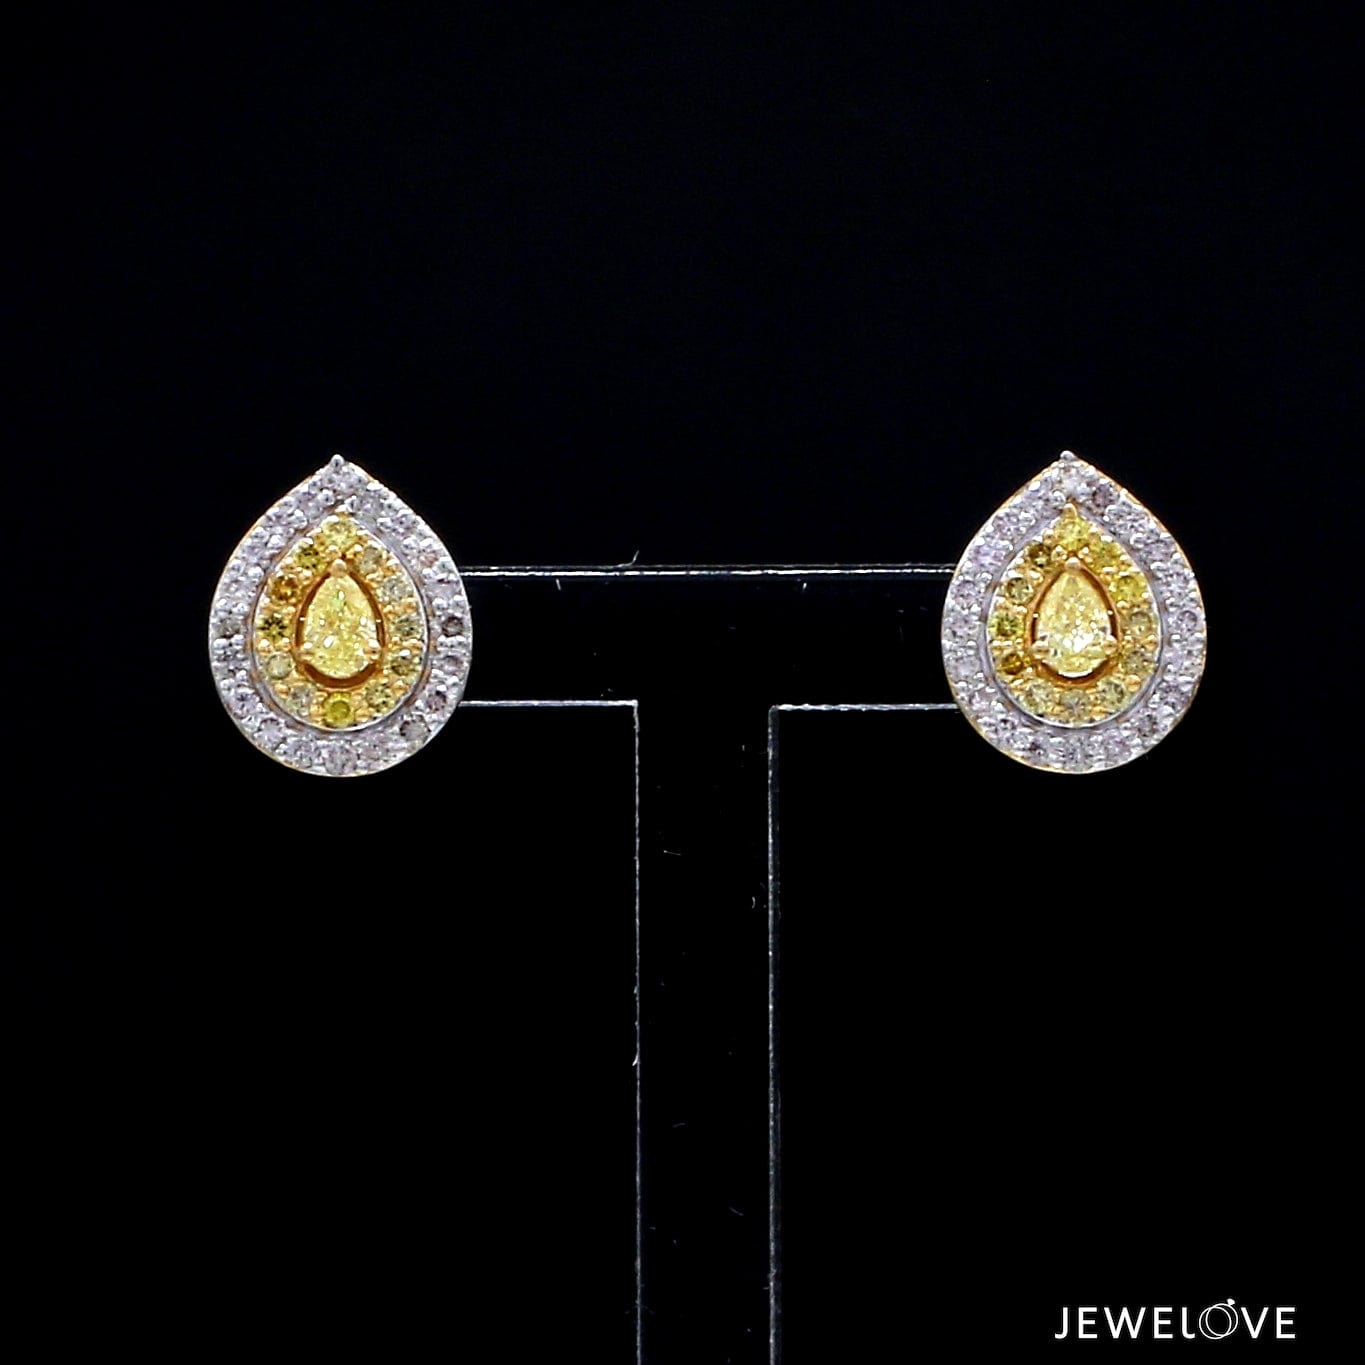 Buy quality designing fancy gold earrings in Ahmedabad